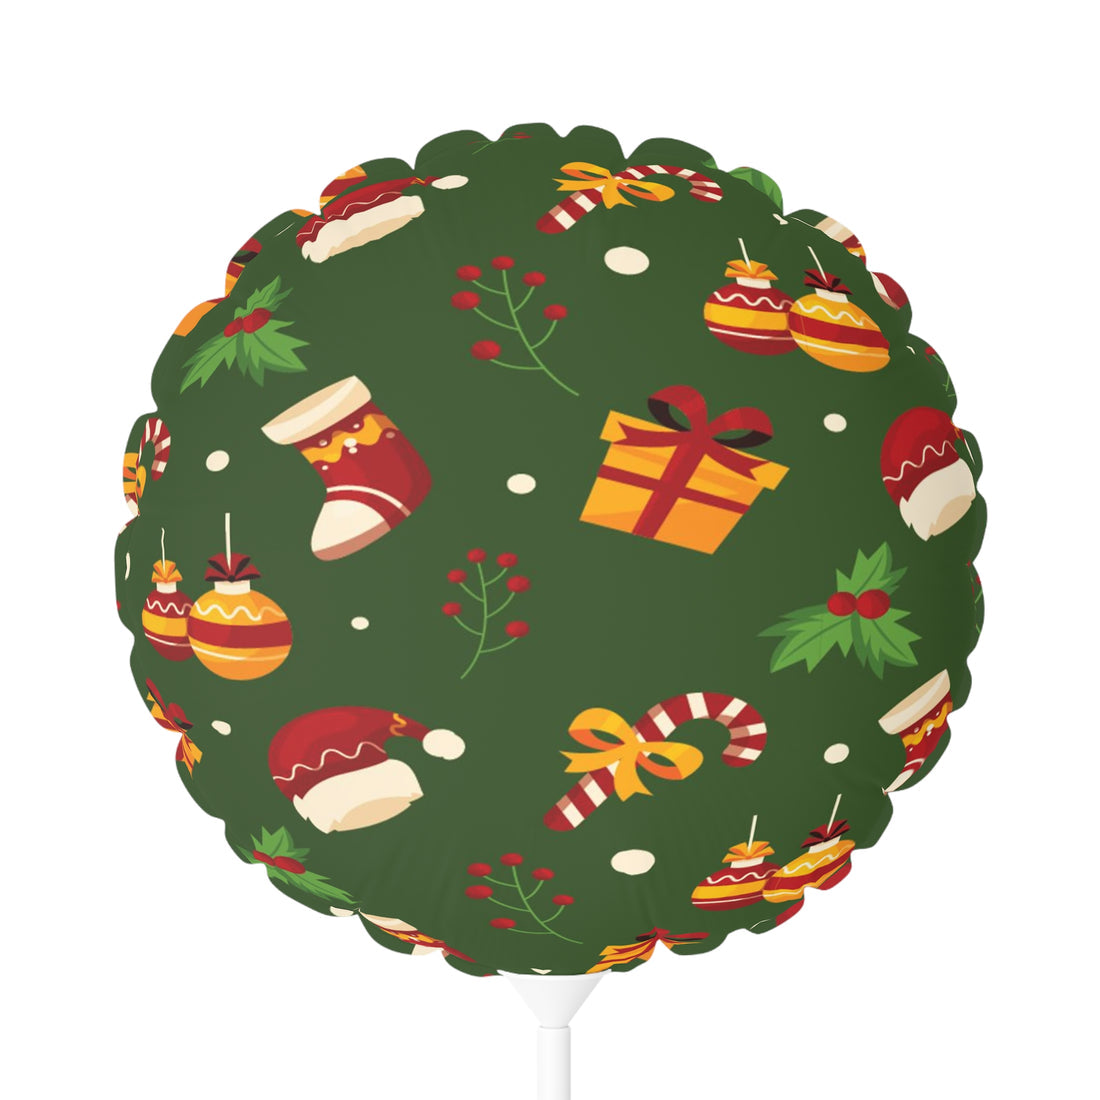 Christmas Balloon (Round and Heart-shaped), 11"